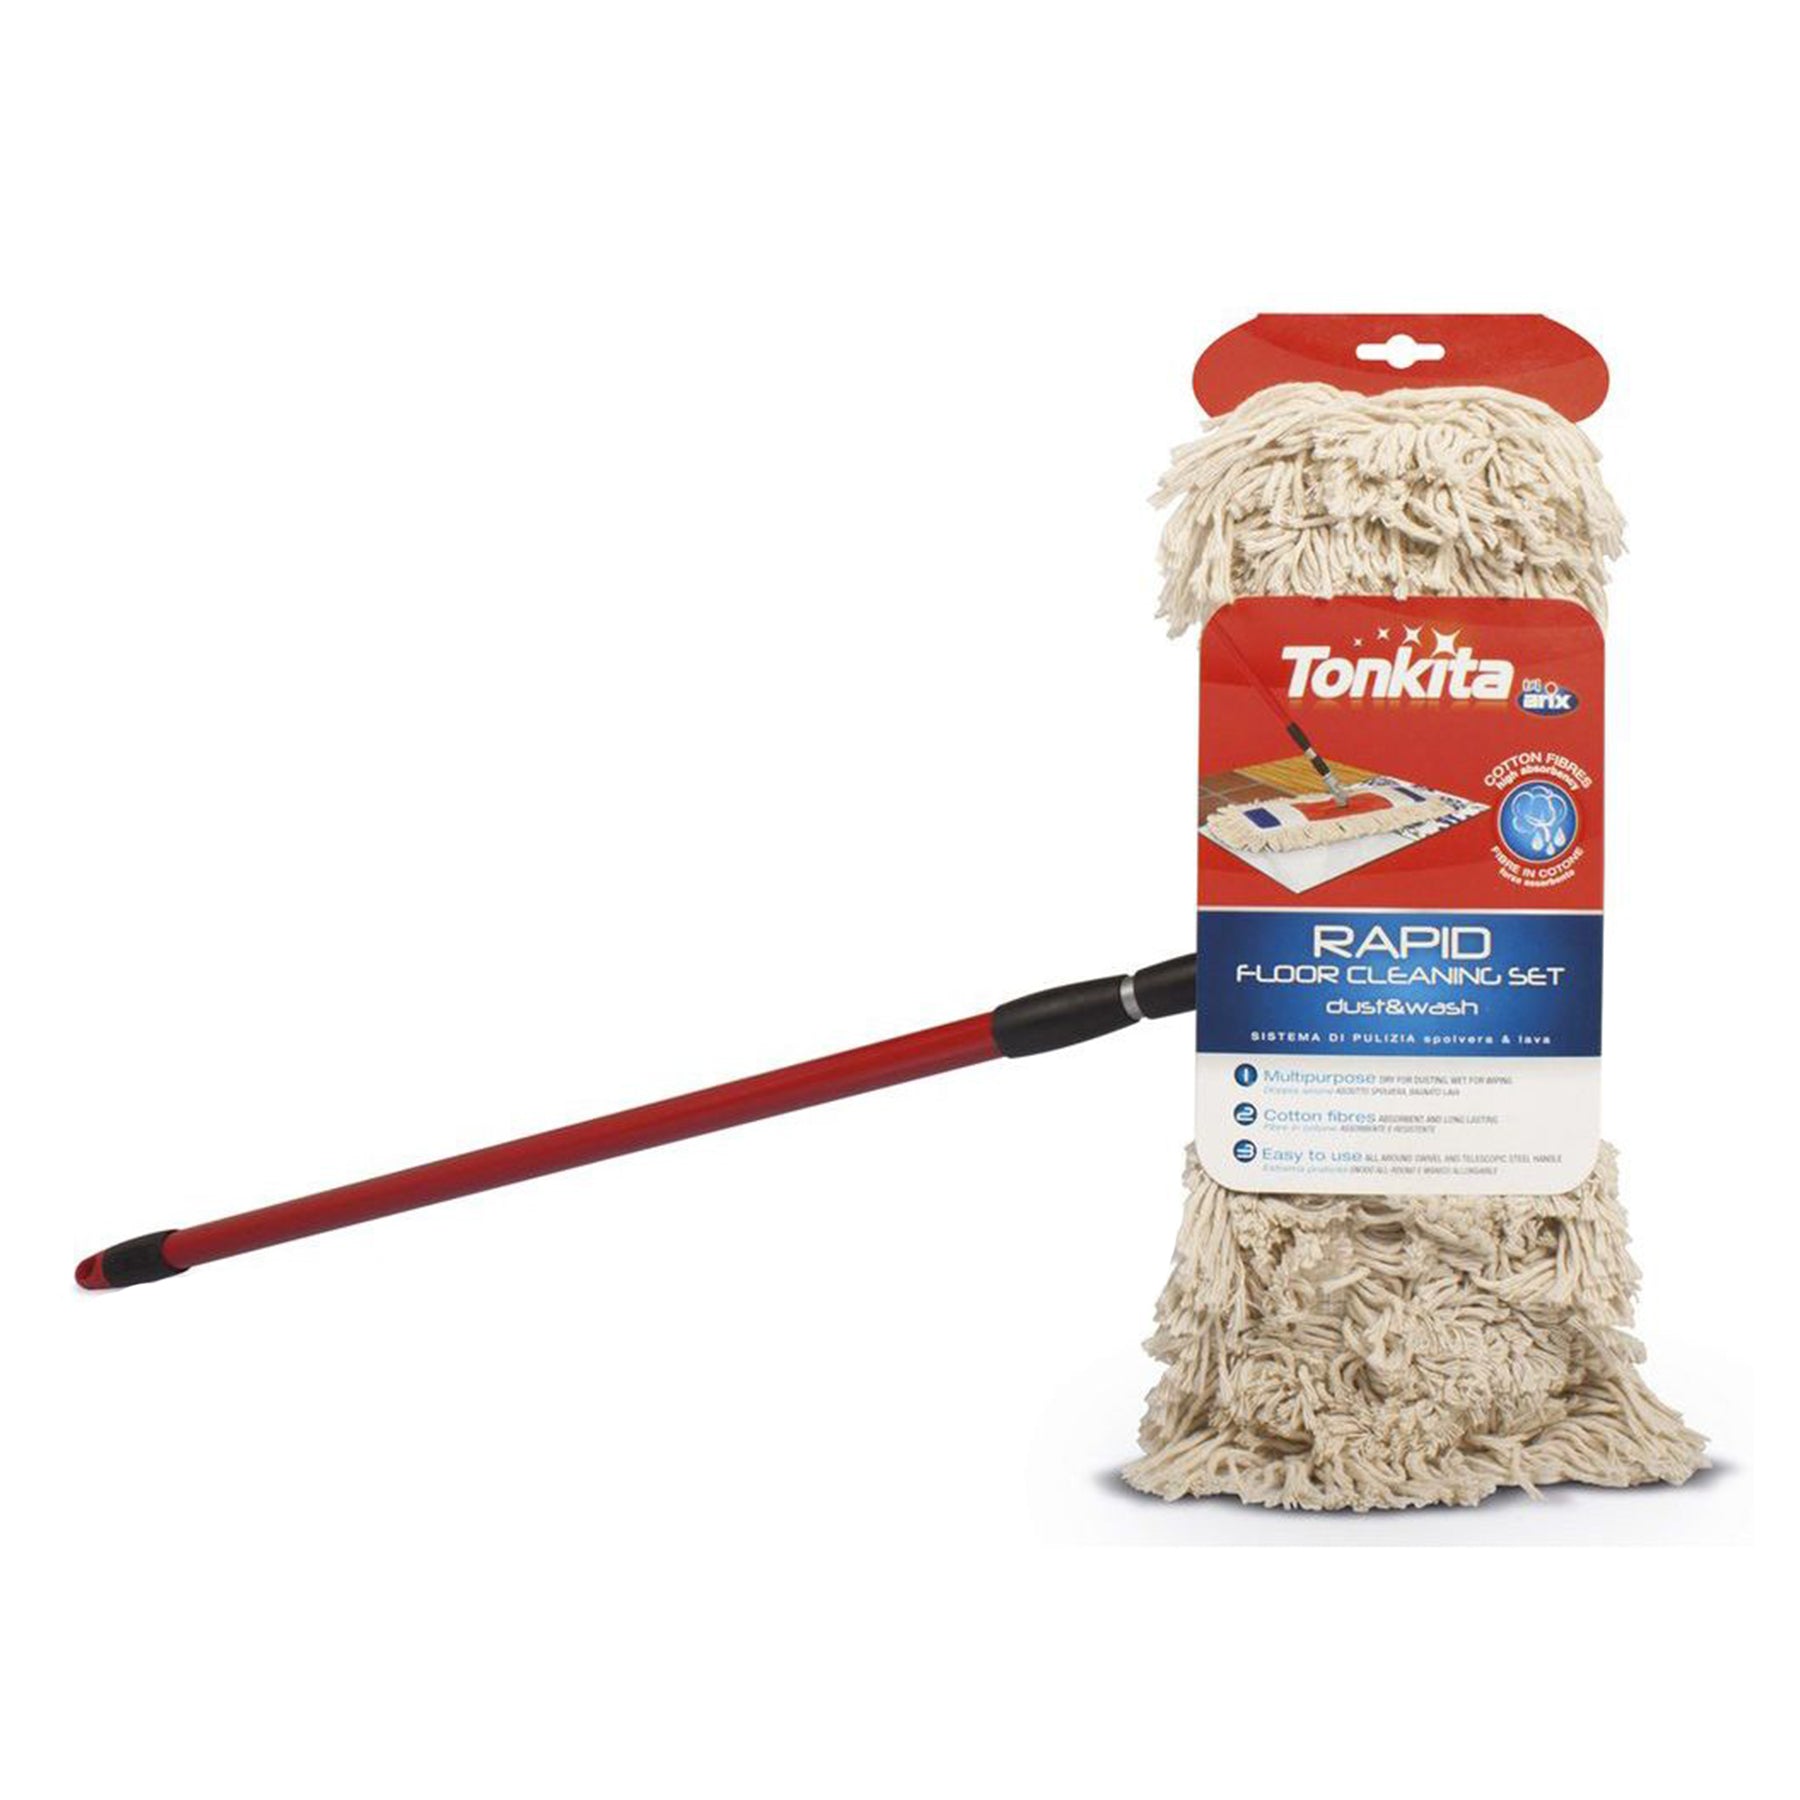 Rapid Cotton Mop w/Handle A high quality rapid Cotton Mop with handle.